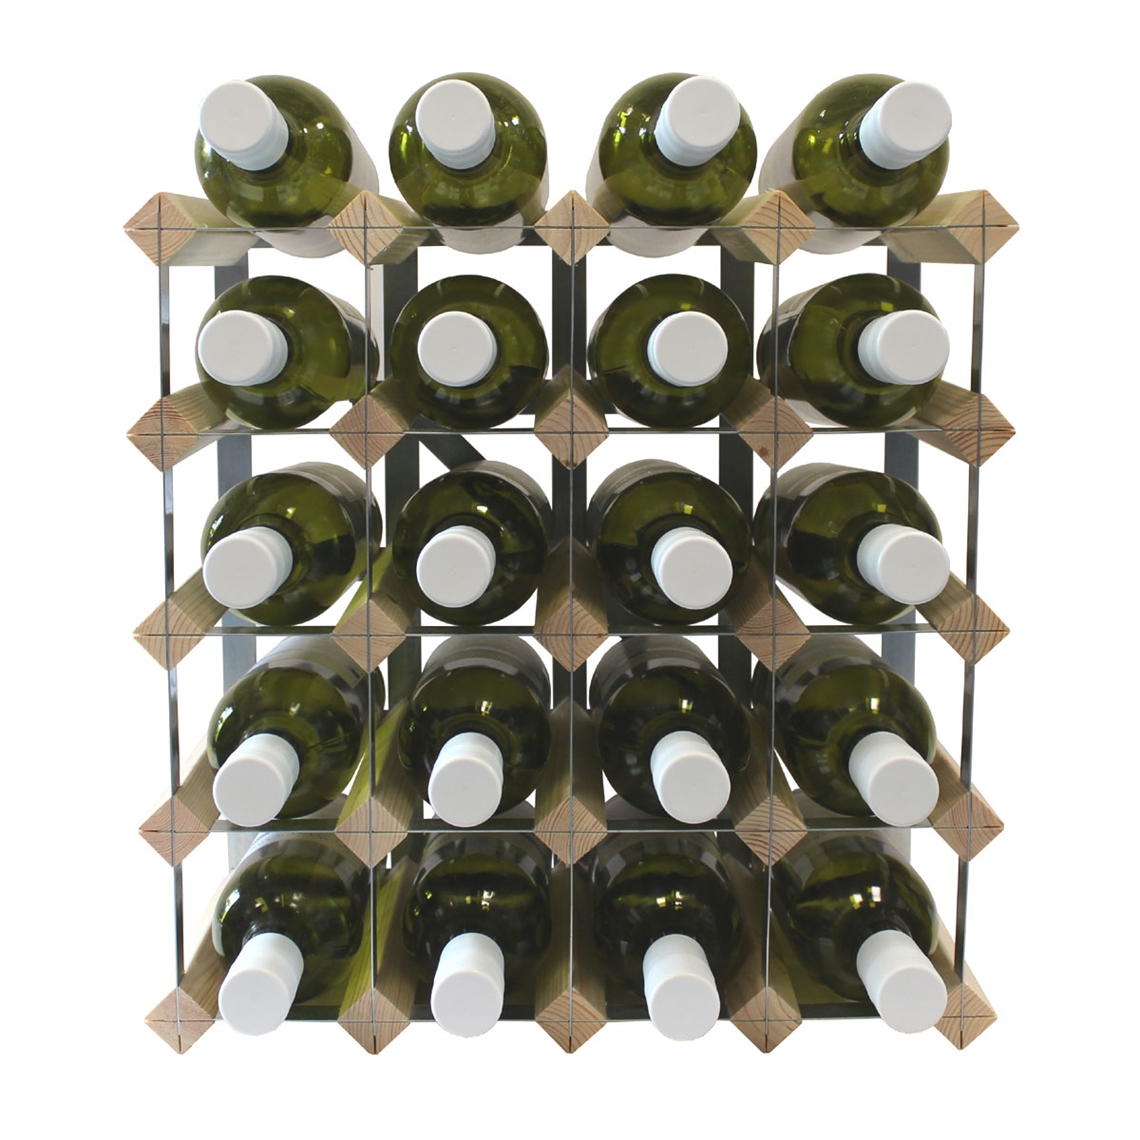 View more under stairs wine racks from our Assembled Wine Racks range